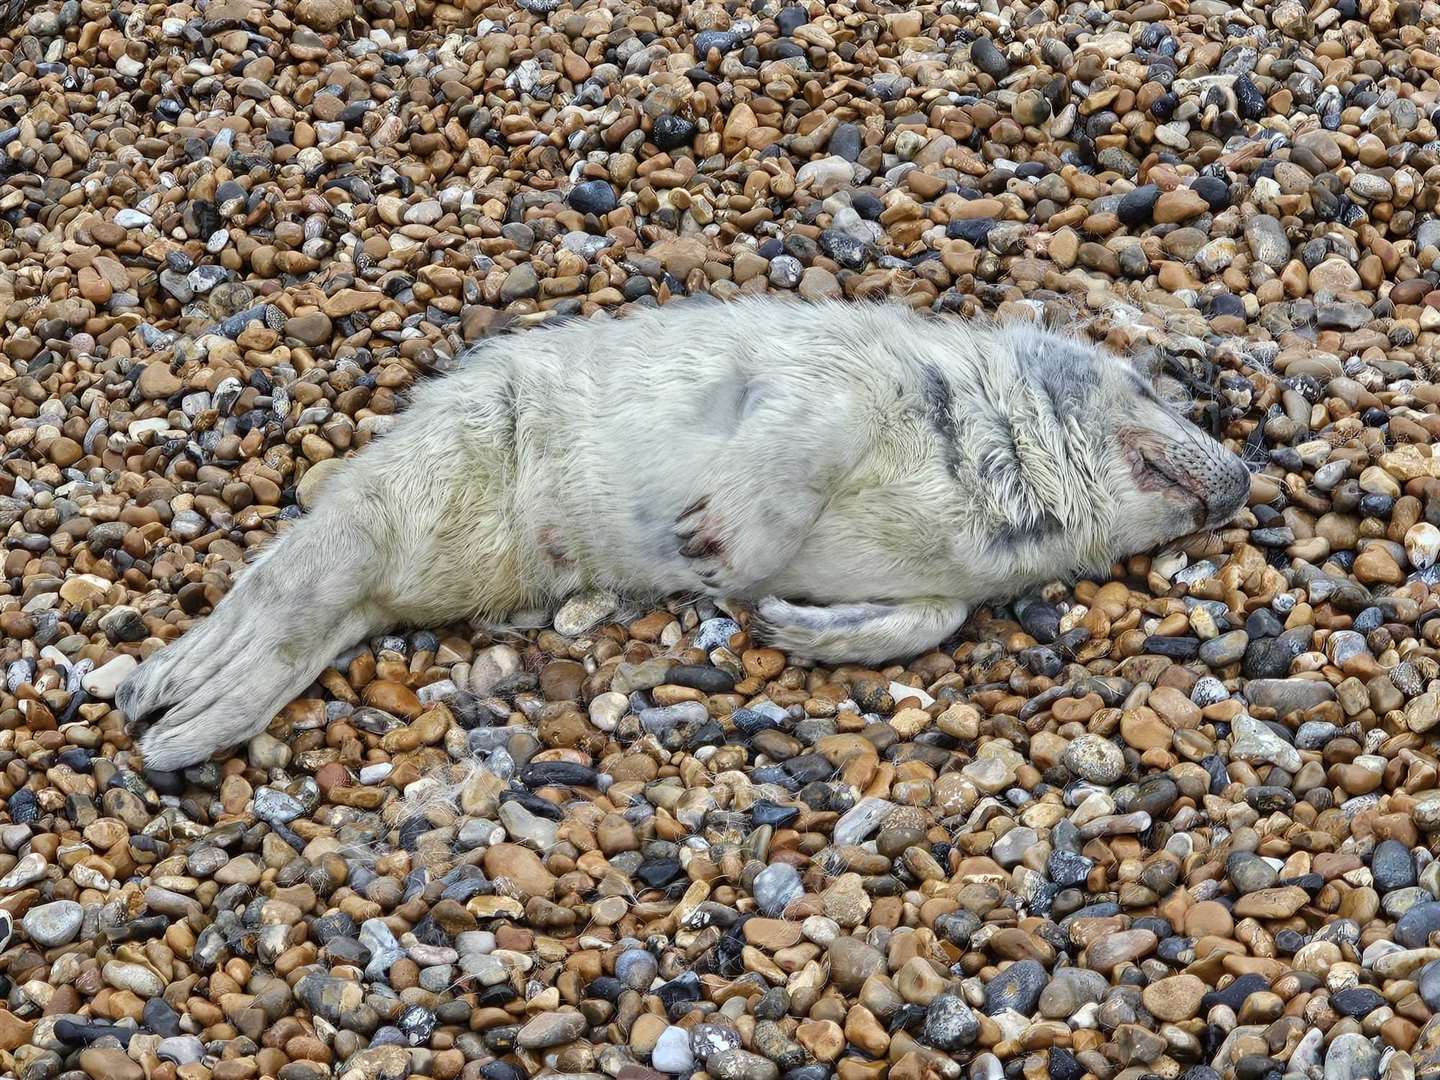 A young seal pup with injuries was rescued from a Deal beach Picture: Alex Levine